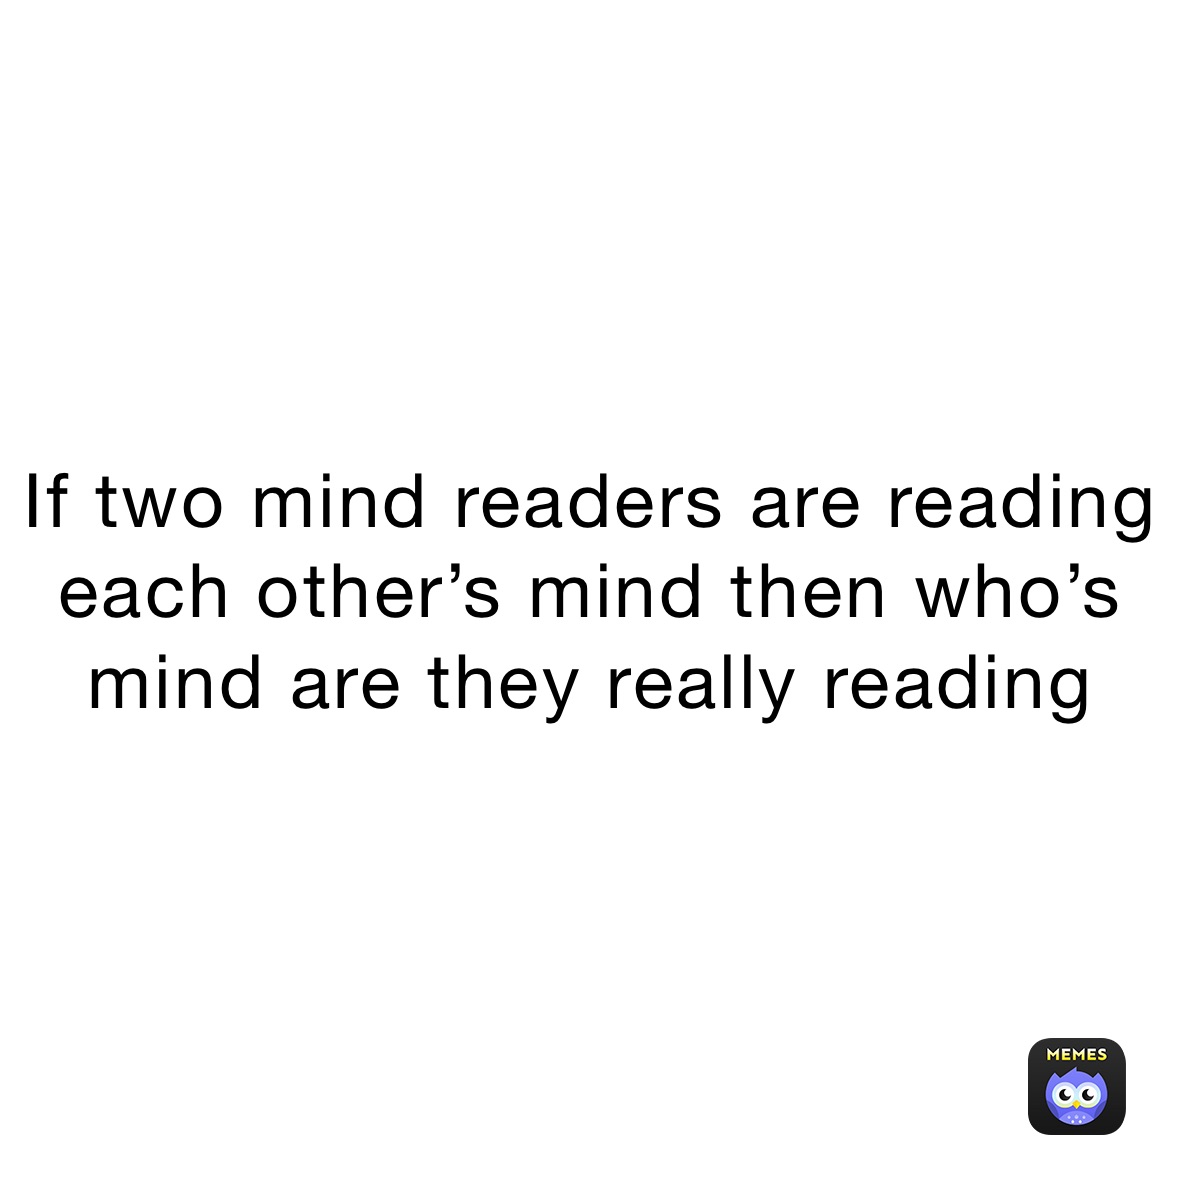 If two mind readers are reading each other’s mind then who’s mind are they really reading